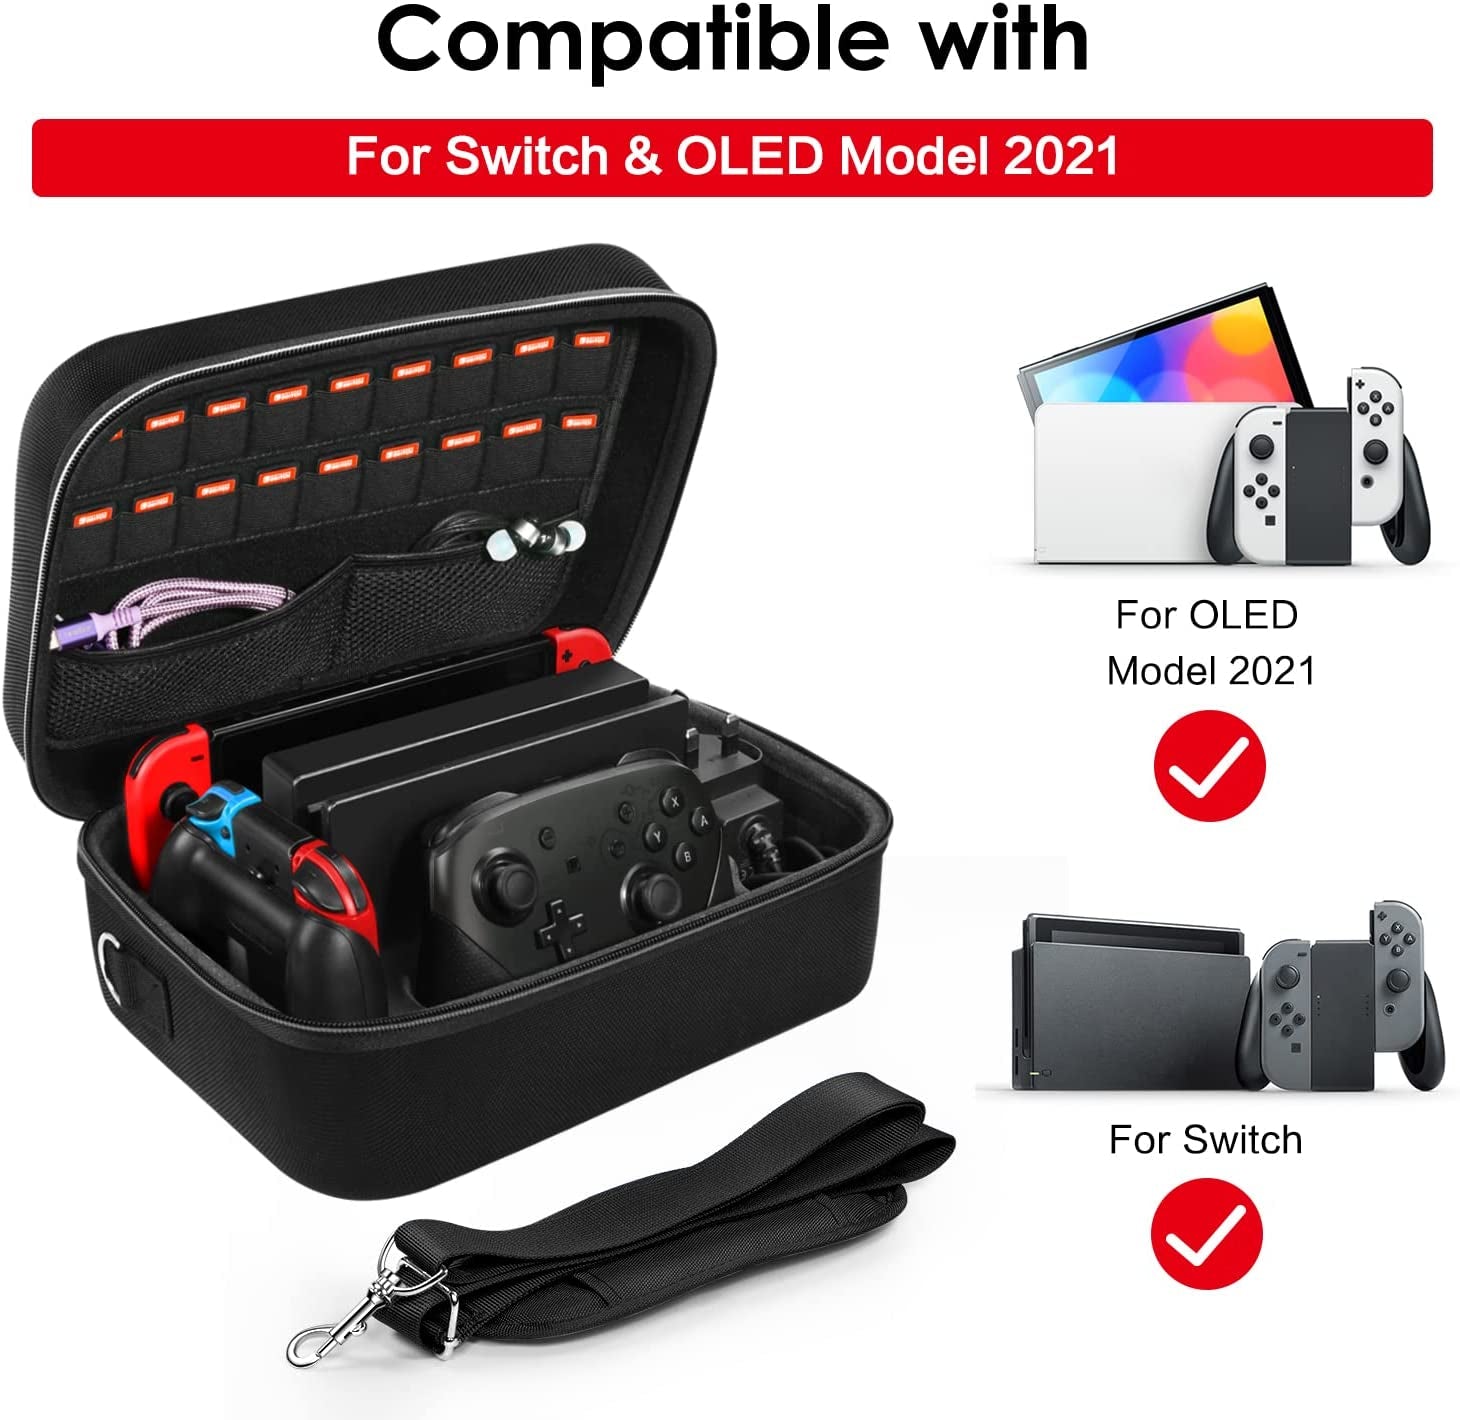 Portable Travel Case for Nintendo Switch and Switch OLED Model, All-in-One Protective Hard Messenger Bag with Soft Lining for18 Games, Switch Console, Pro Controller, and Accessories 